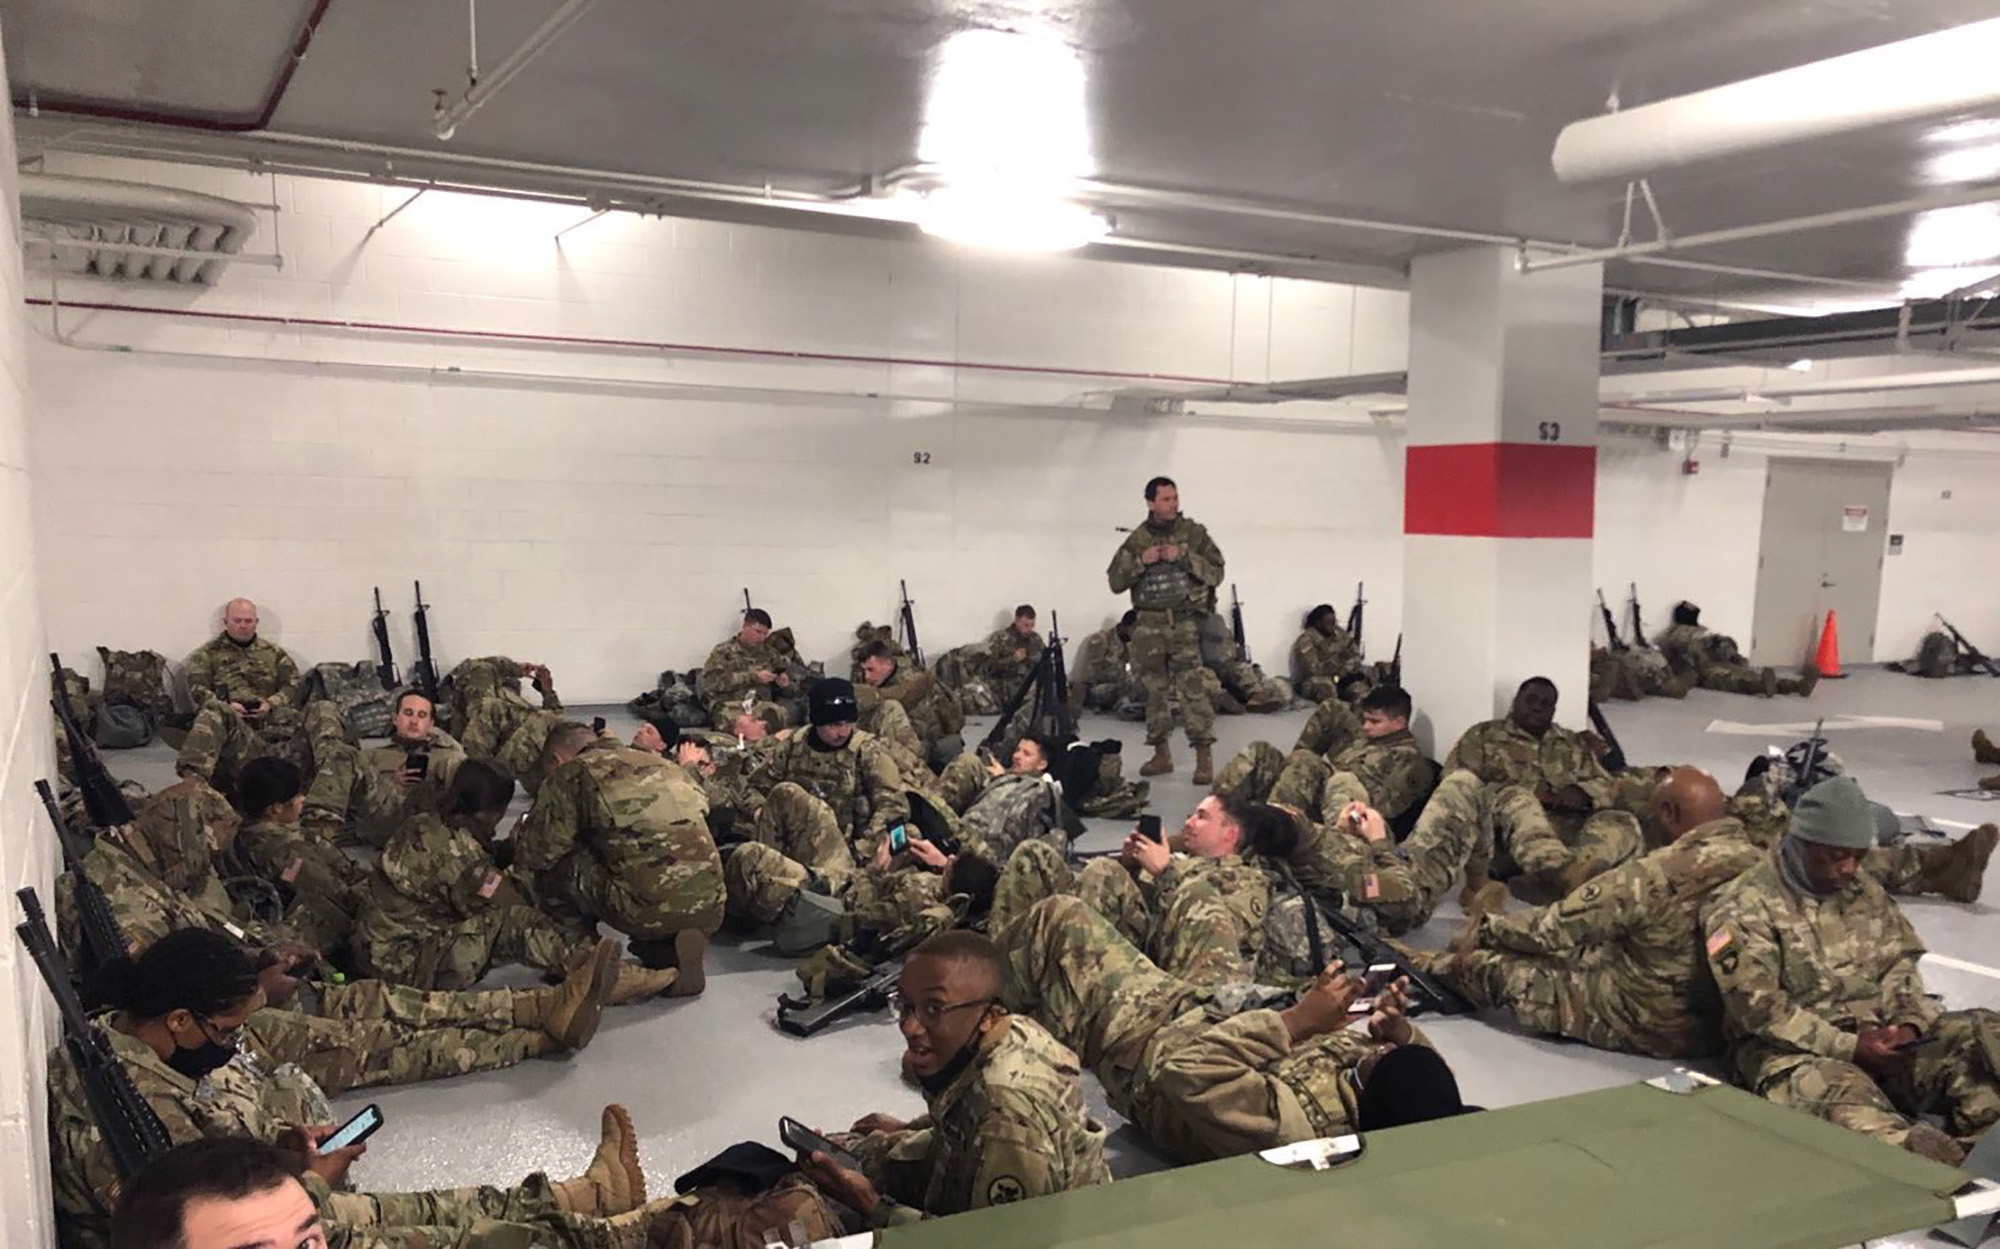 PHOTO: Photos like this one, showing the National Guardsmen resting in a parking garage, after they were ordered to leave the Capitol building following the inauguration on Jan. 20, 2021, sparked outrage among lawmakers.